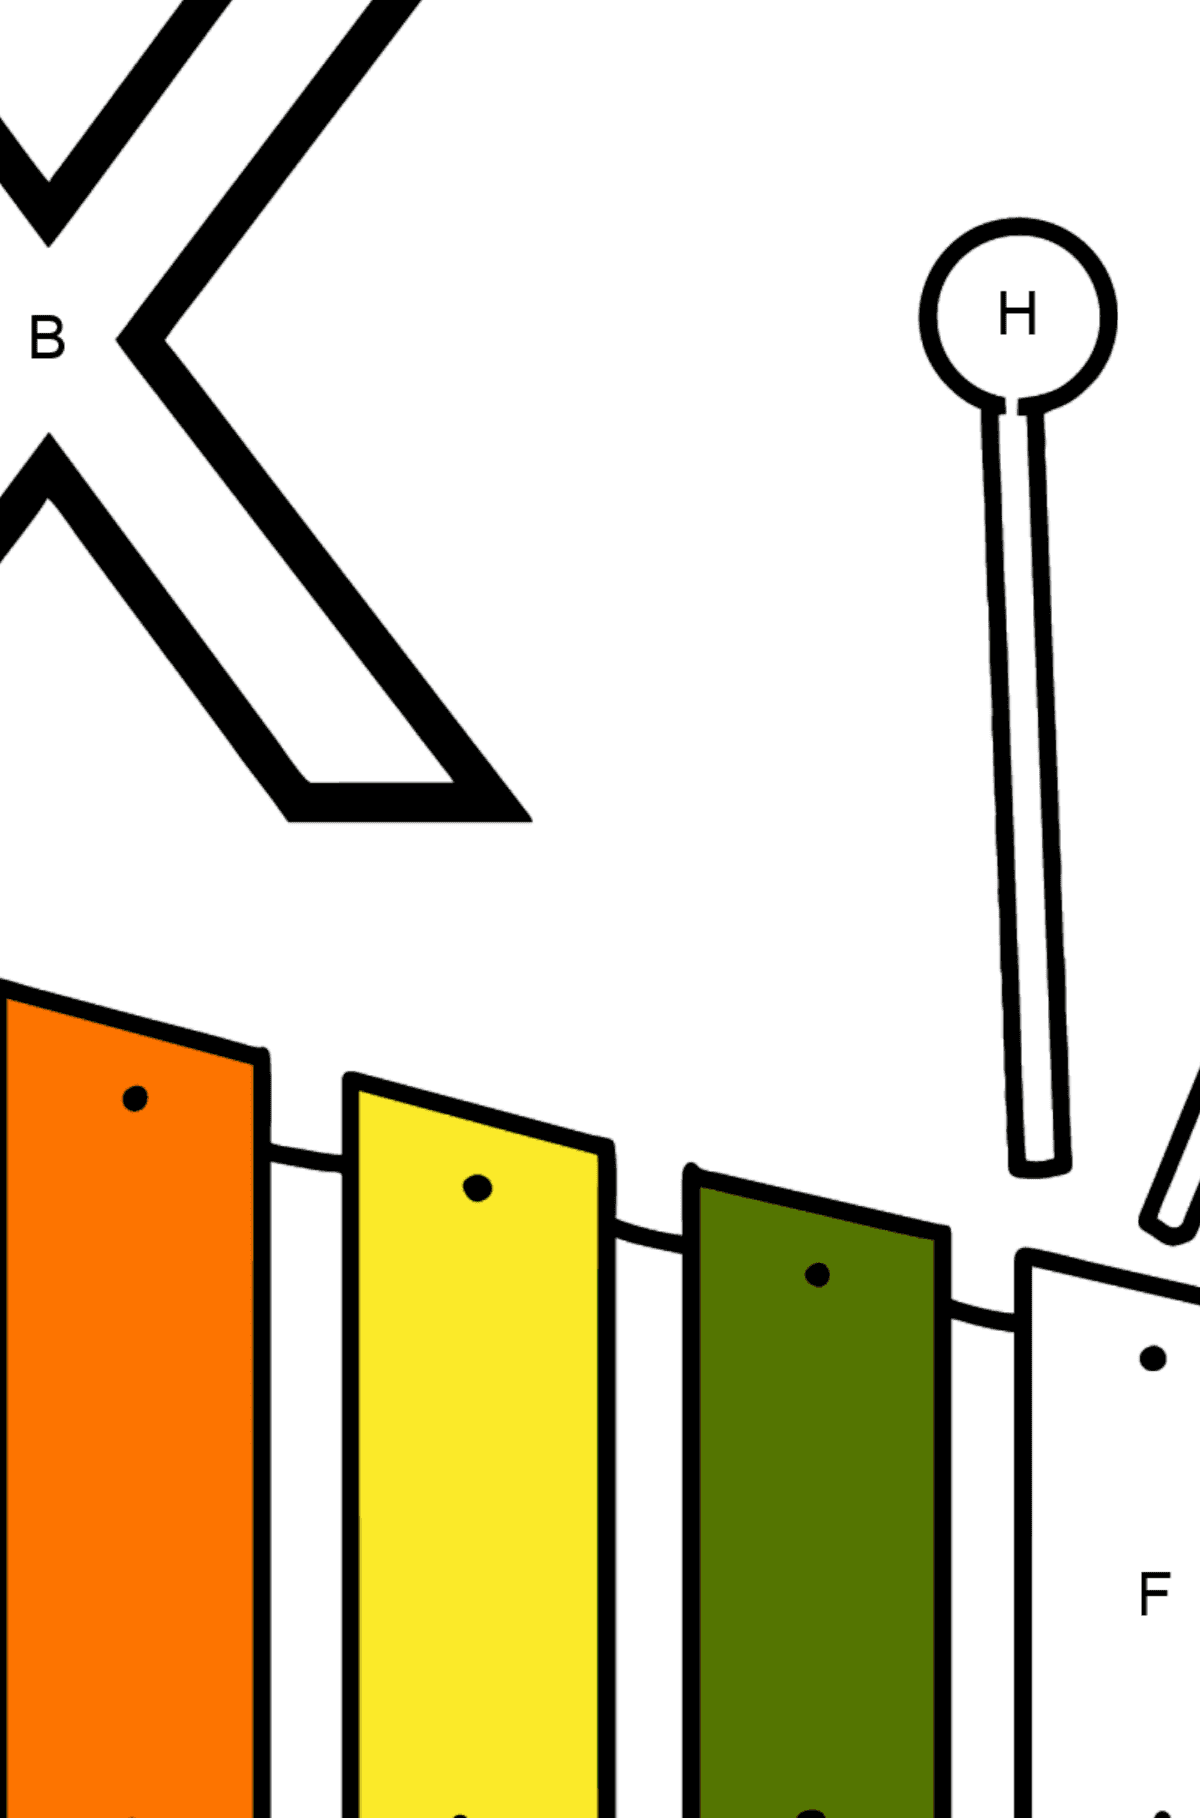 French Letter X coloring pages - XYLOPHONE - Coloring by Letters for Kids